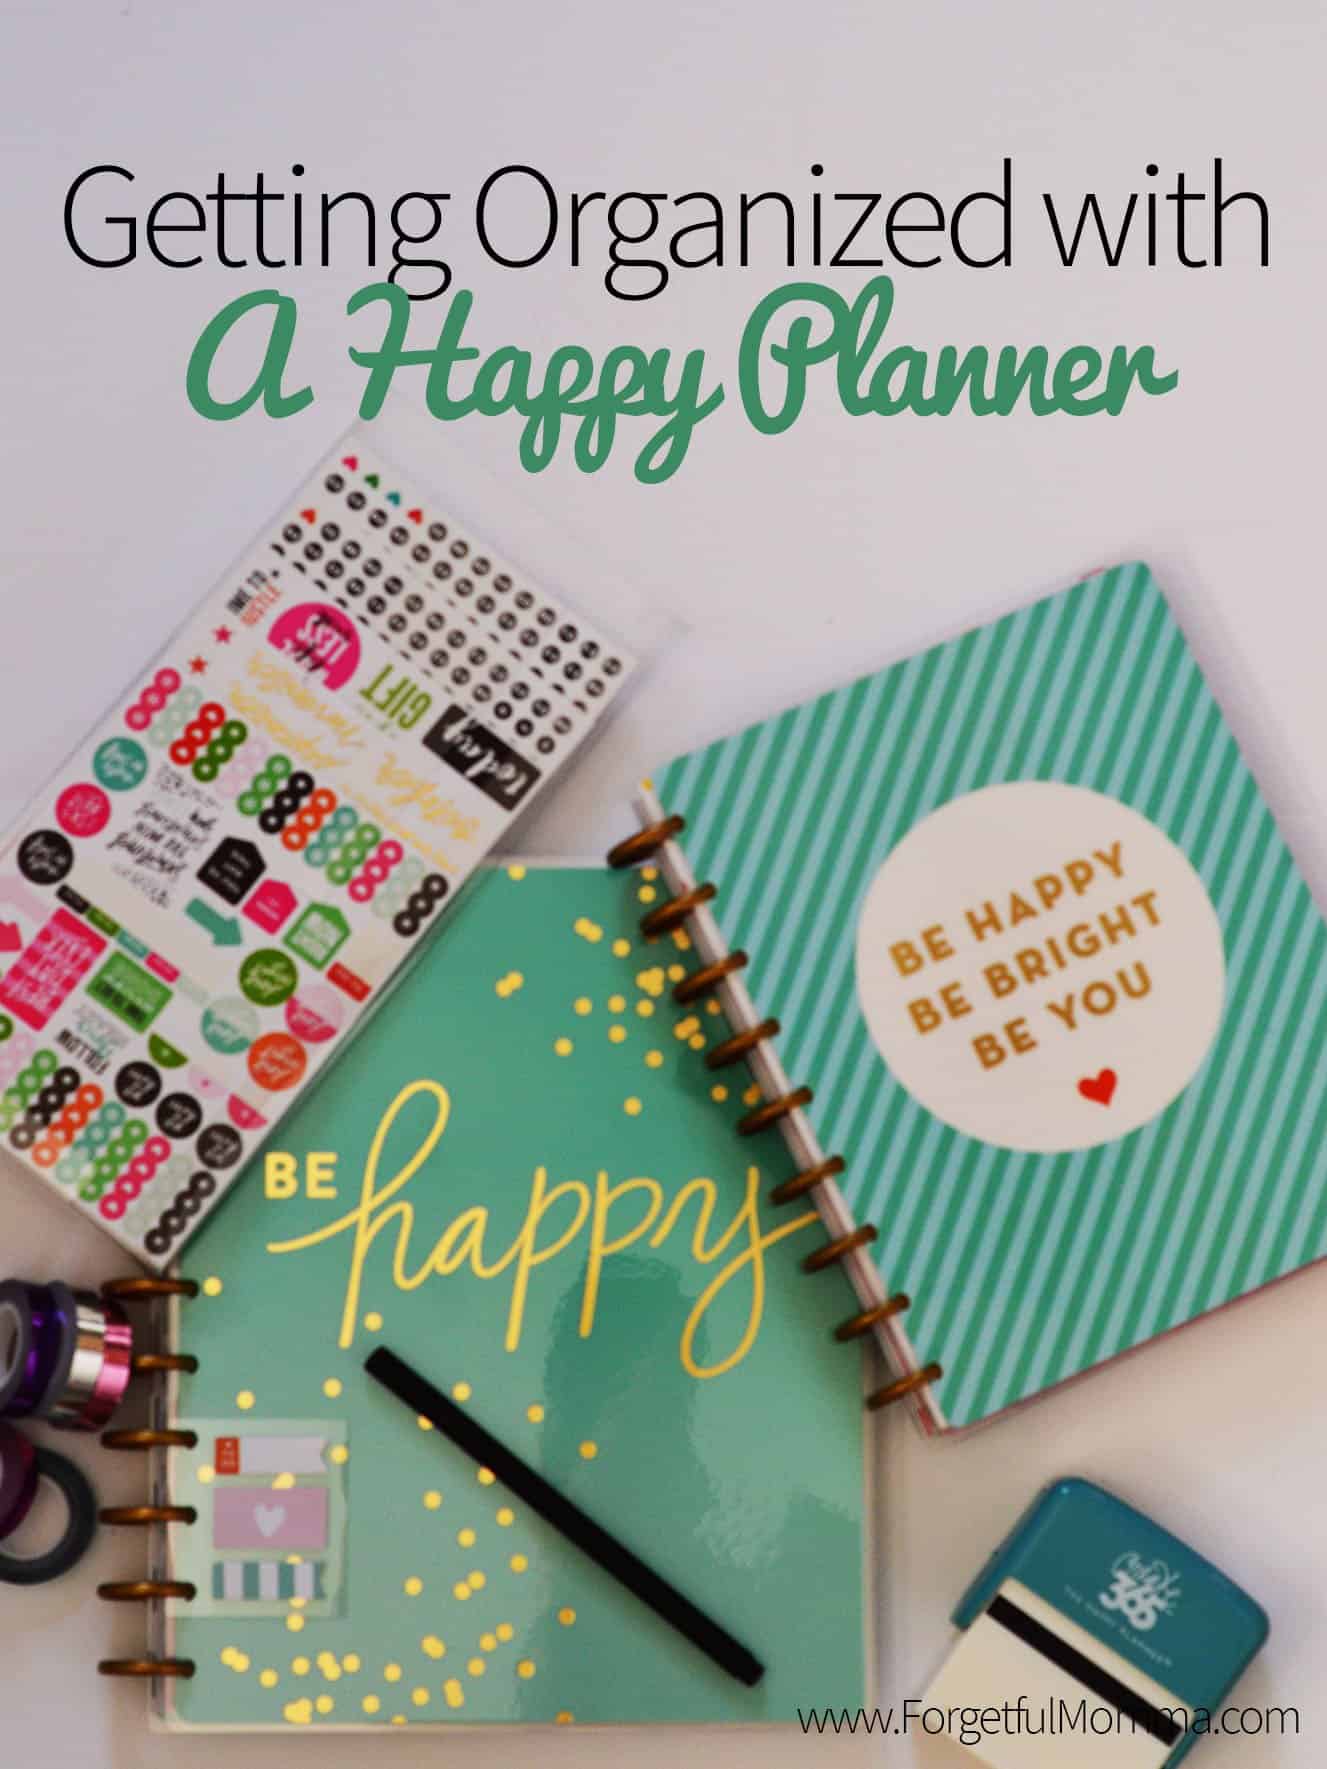 Getting Organized with A Happy Planner